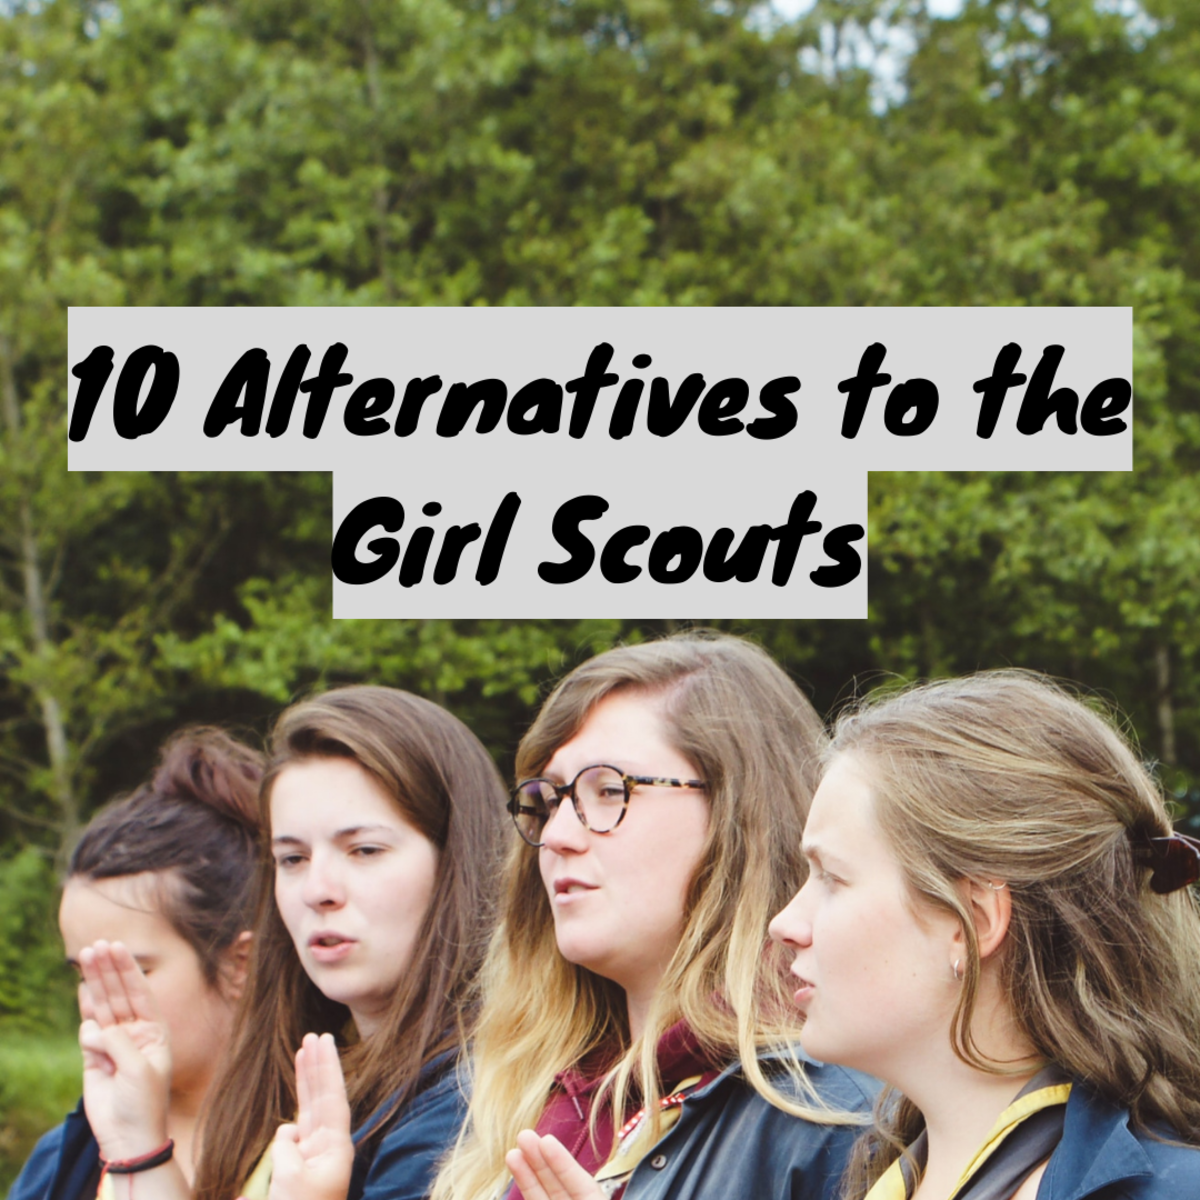 Looking for a Girl Scouts alternative? Here is a list of 10 similar organizations you might like to consider.